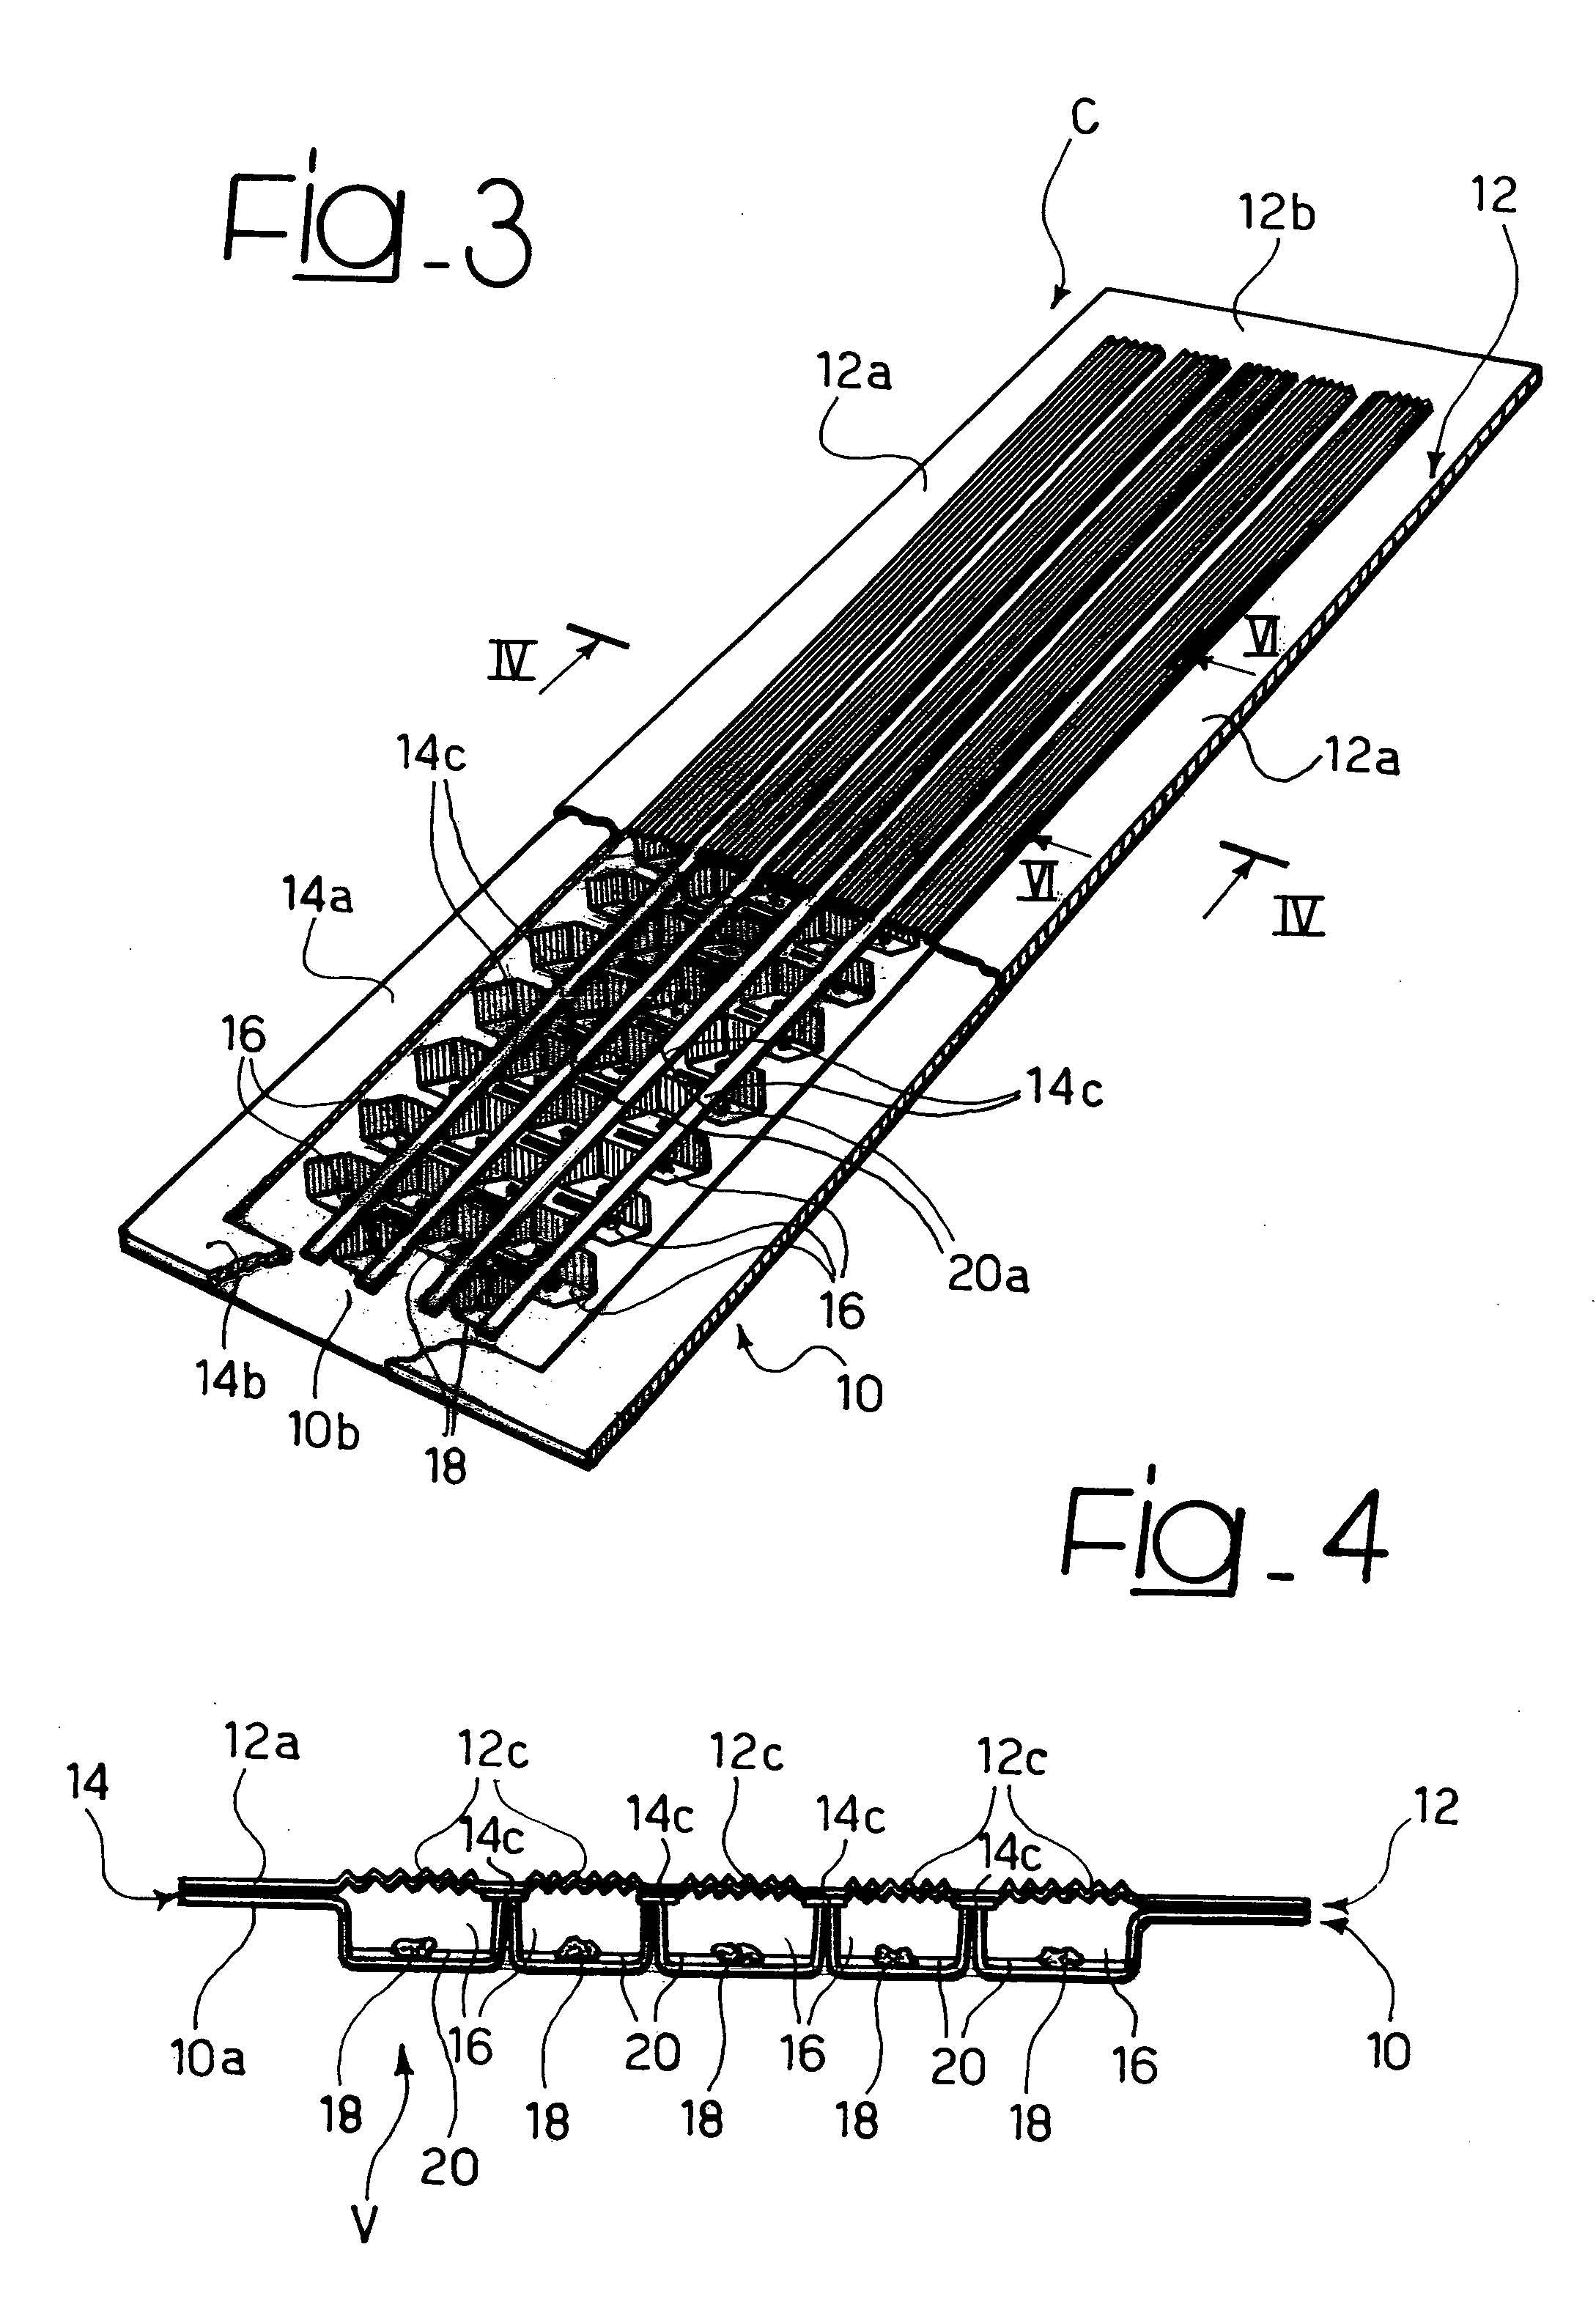 Absorbing element for sanitary products, having expandable pockets containing superabsorbent material and manufacturing process